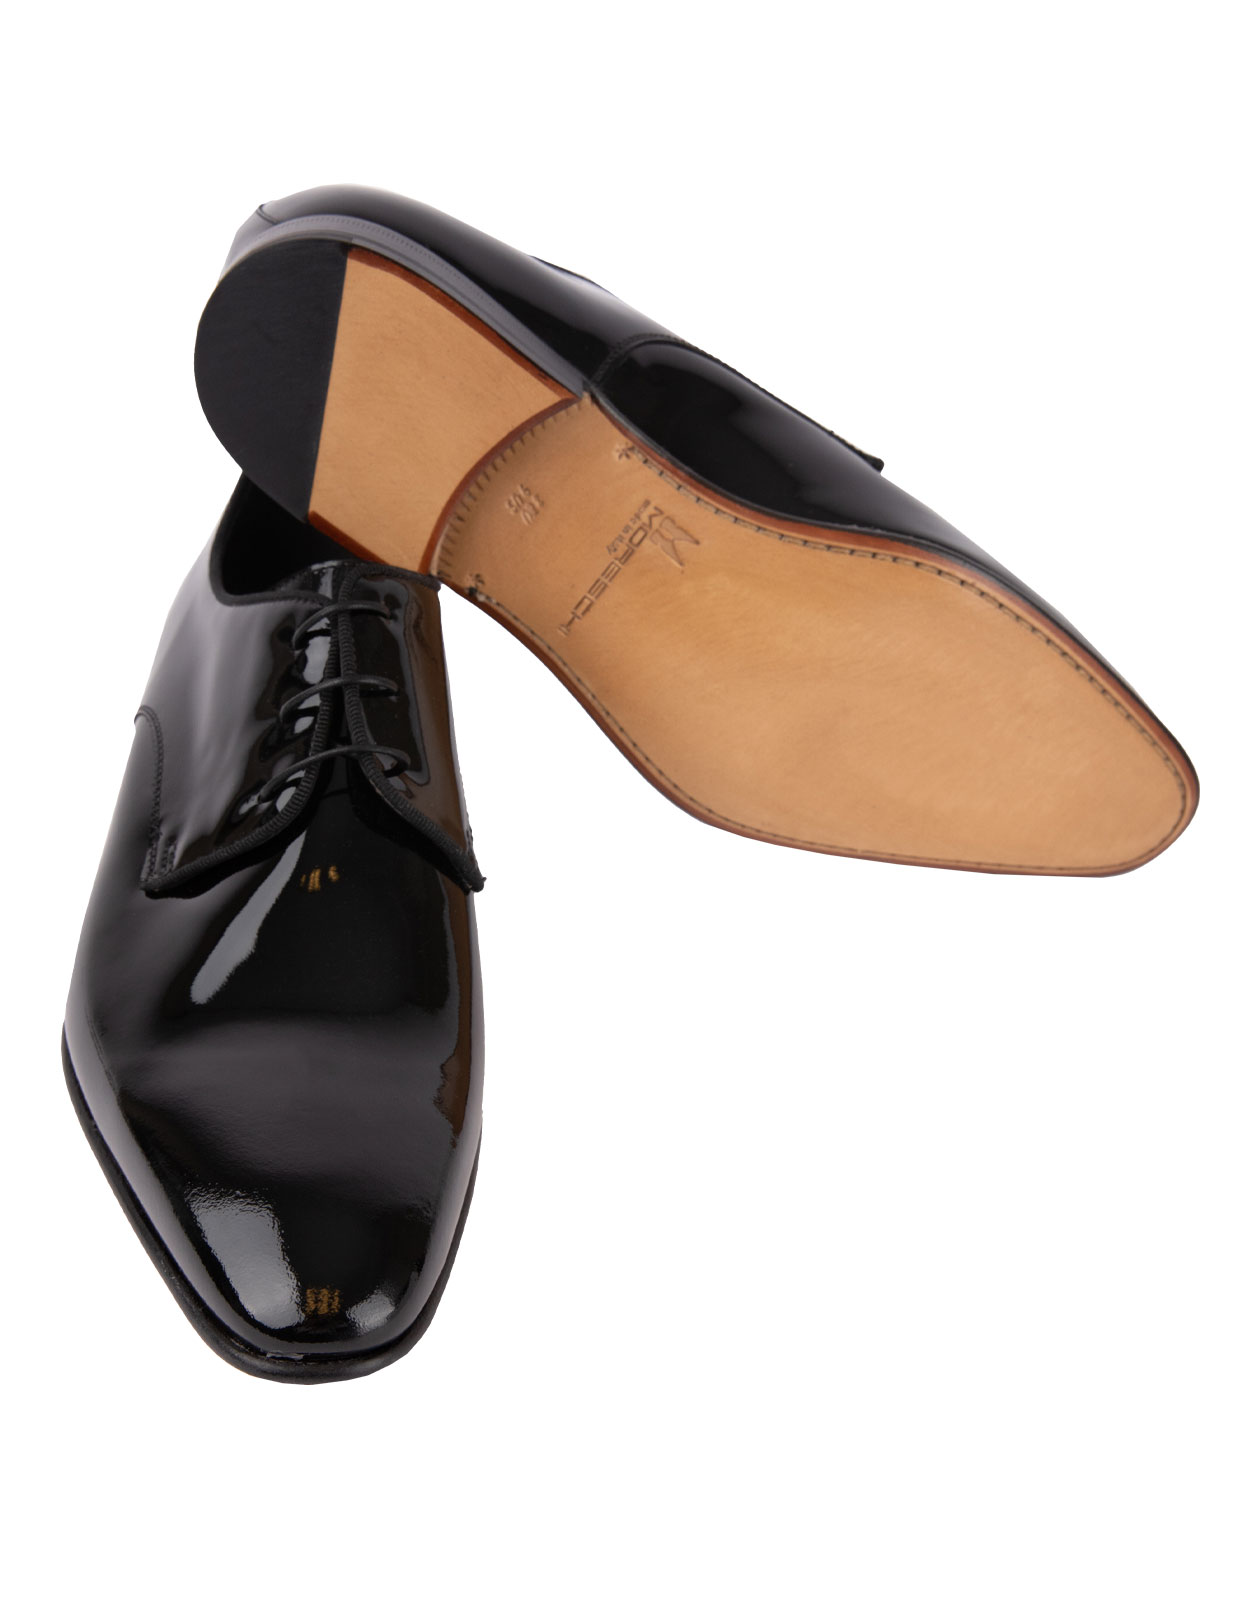 Lille Patent Leather Derby Shoes Black